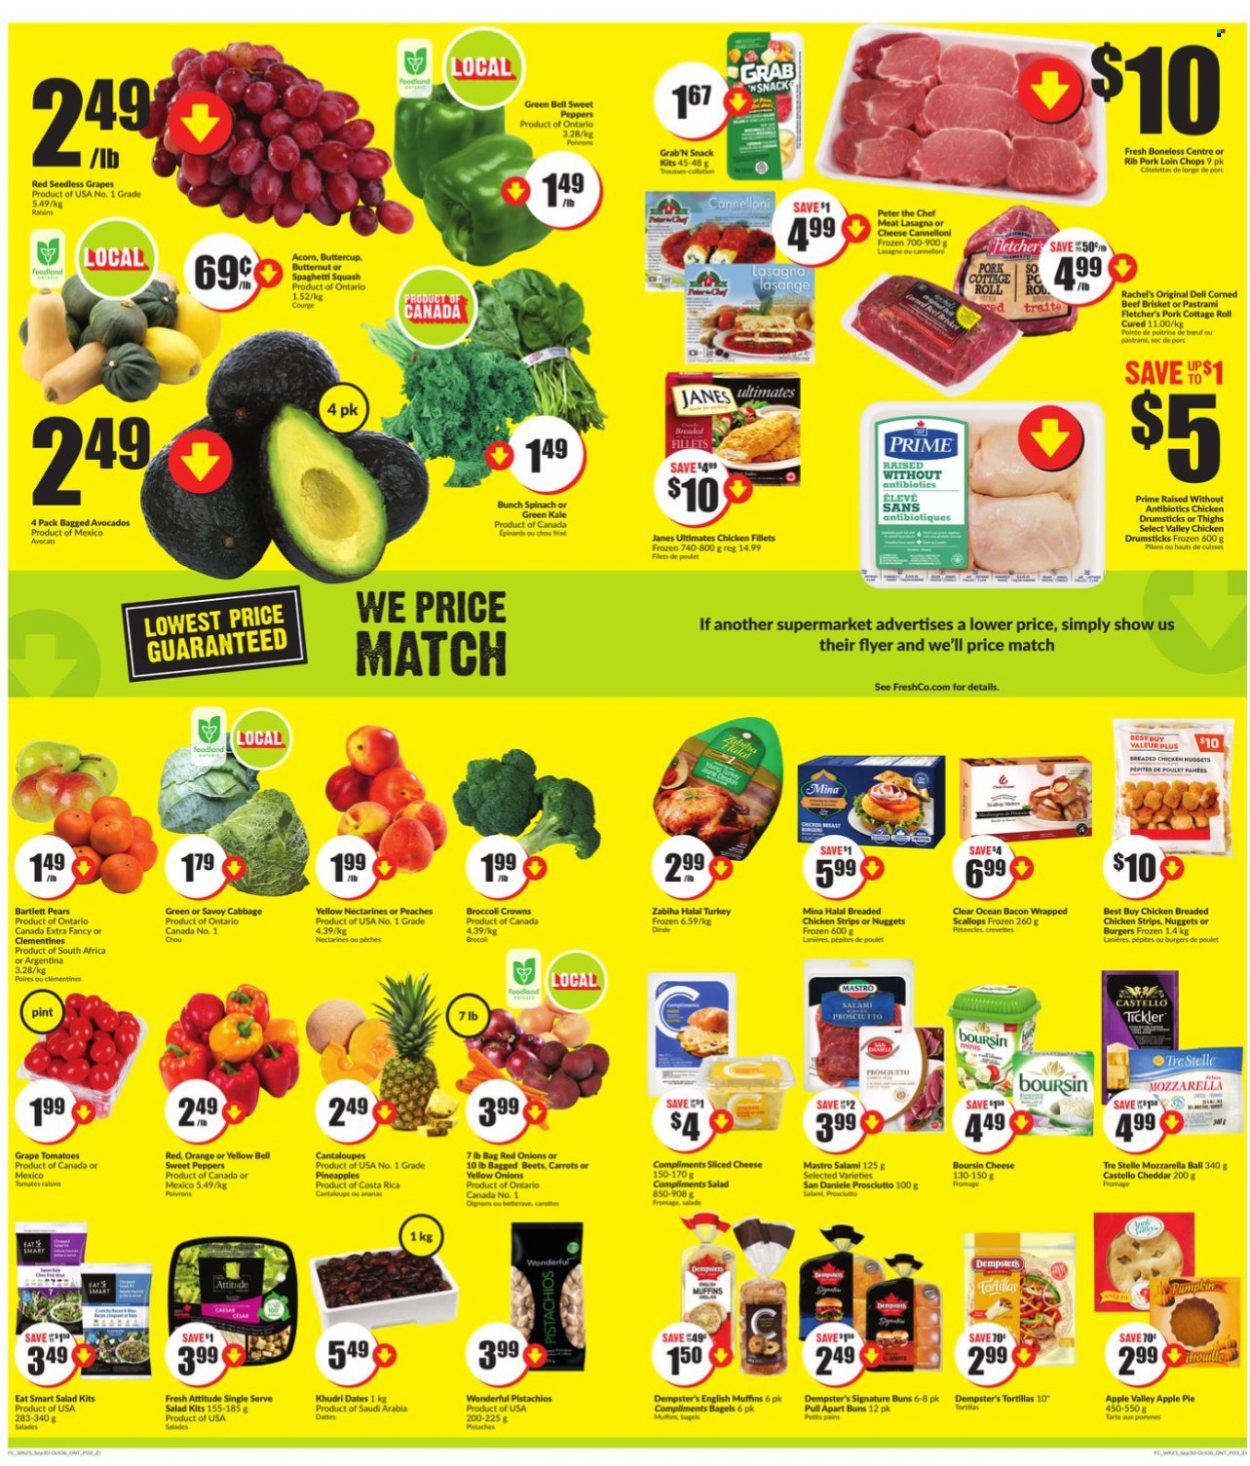 thumbnail - FreshCo. Flyer - September 30, 2021 - October 06, 2021 - Sales products - english muffins, tortillas, pie, buns, apple pie, butternut squash, cabbage, cantaloupe, carrots, sweet peppers, tomatoes, kale, pumpkin, onion, salad, peppers, avocado, Bartlett pears, clementines, nectarines, seedless grapes, pineapple, pears, peaches, scallops, nuggets, fried chicken, lasagna meal, bacon, salami, prosciutto, pastrami, corned beef, sliced cheese, cheddar, strips, chicken strips, snack, dried fruit, pistachios, chicken drumsticks, chicken, beef meat, beef brisket, pork chops, pork loin, pork meat, mozzarella, raisins, oranges. Page 2.